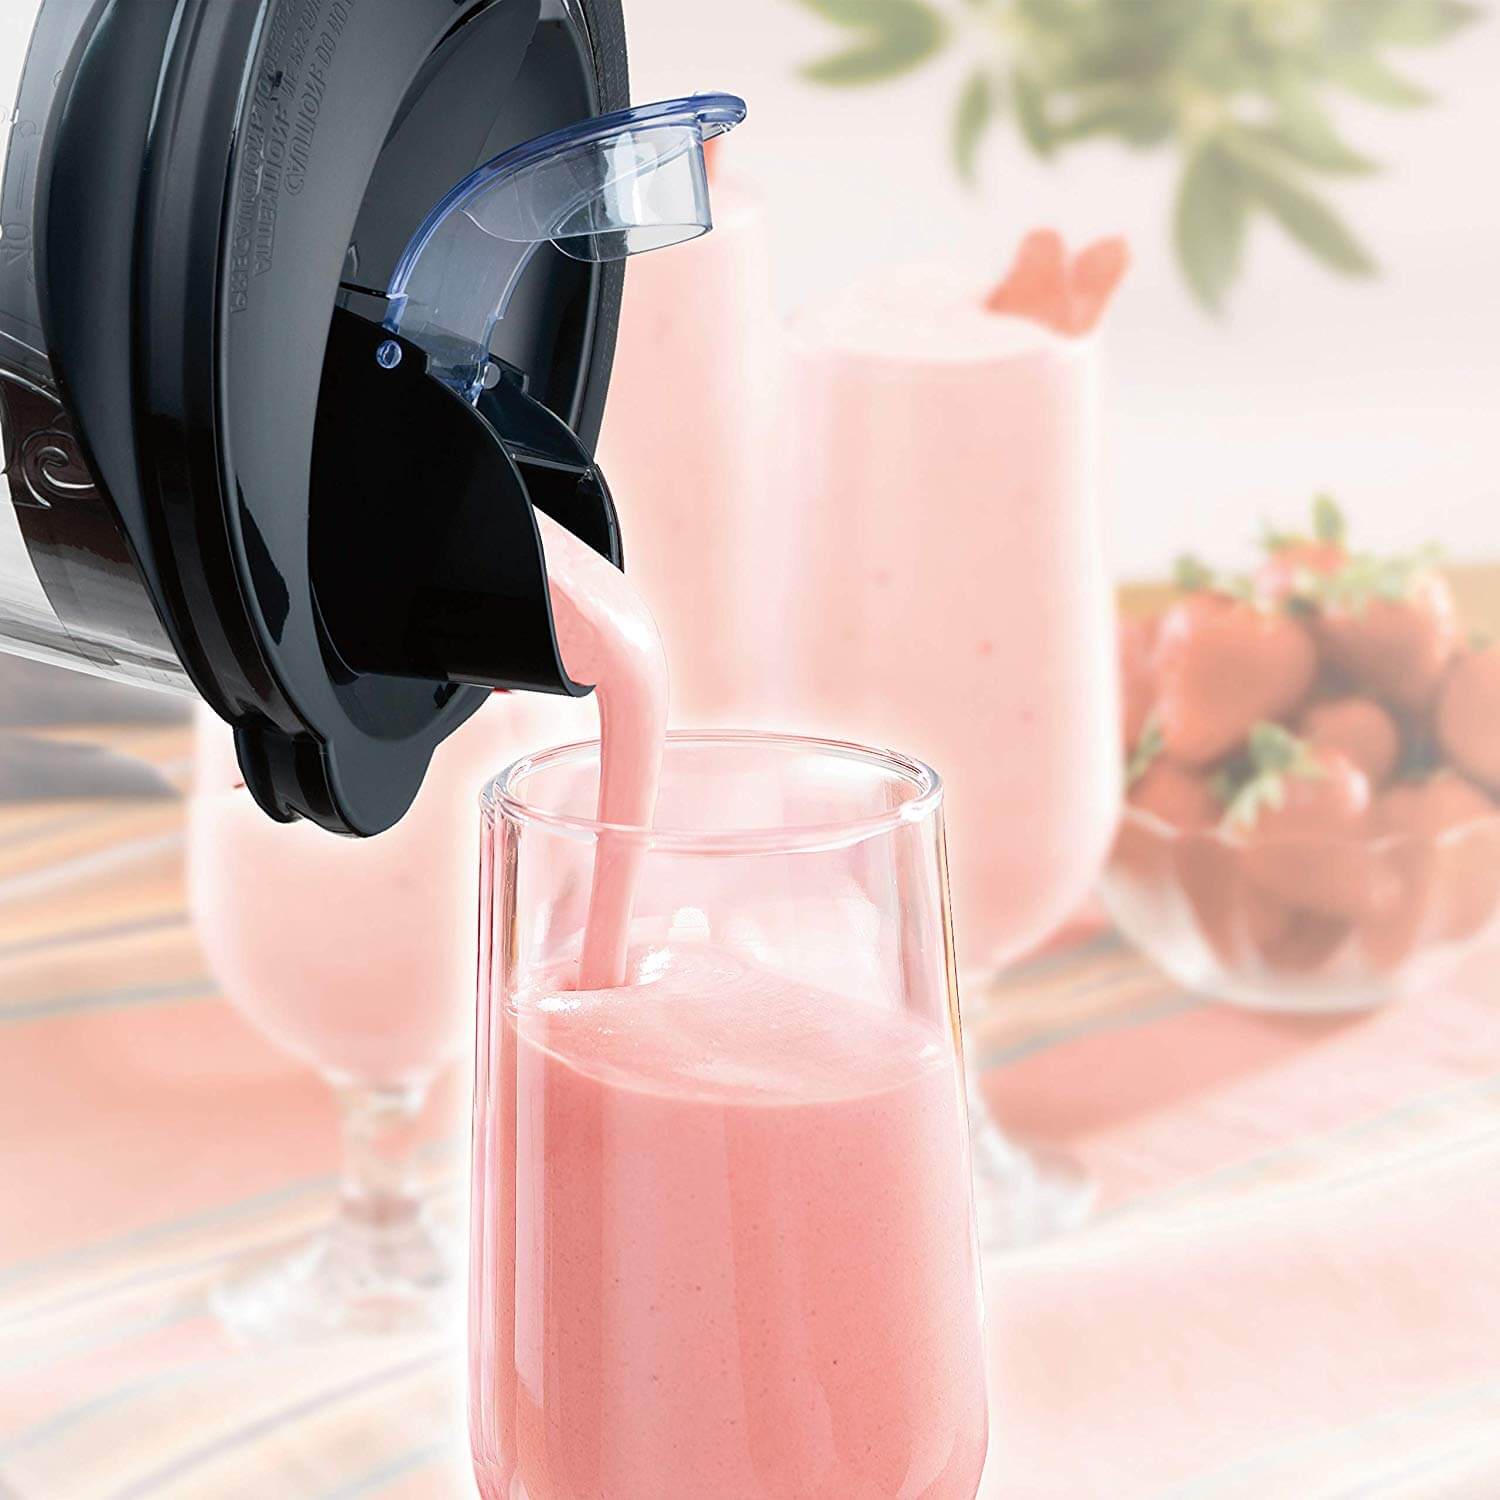 Hamilton Beach Wave Crusher Blender Review - [Ultimate Buyers Guide For